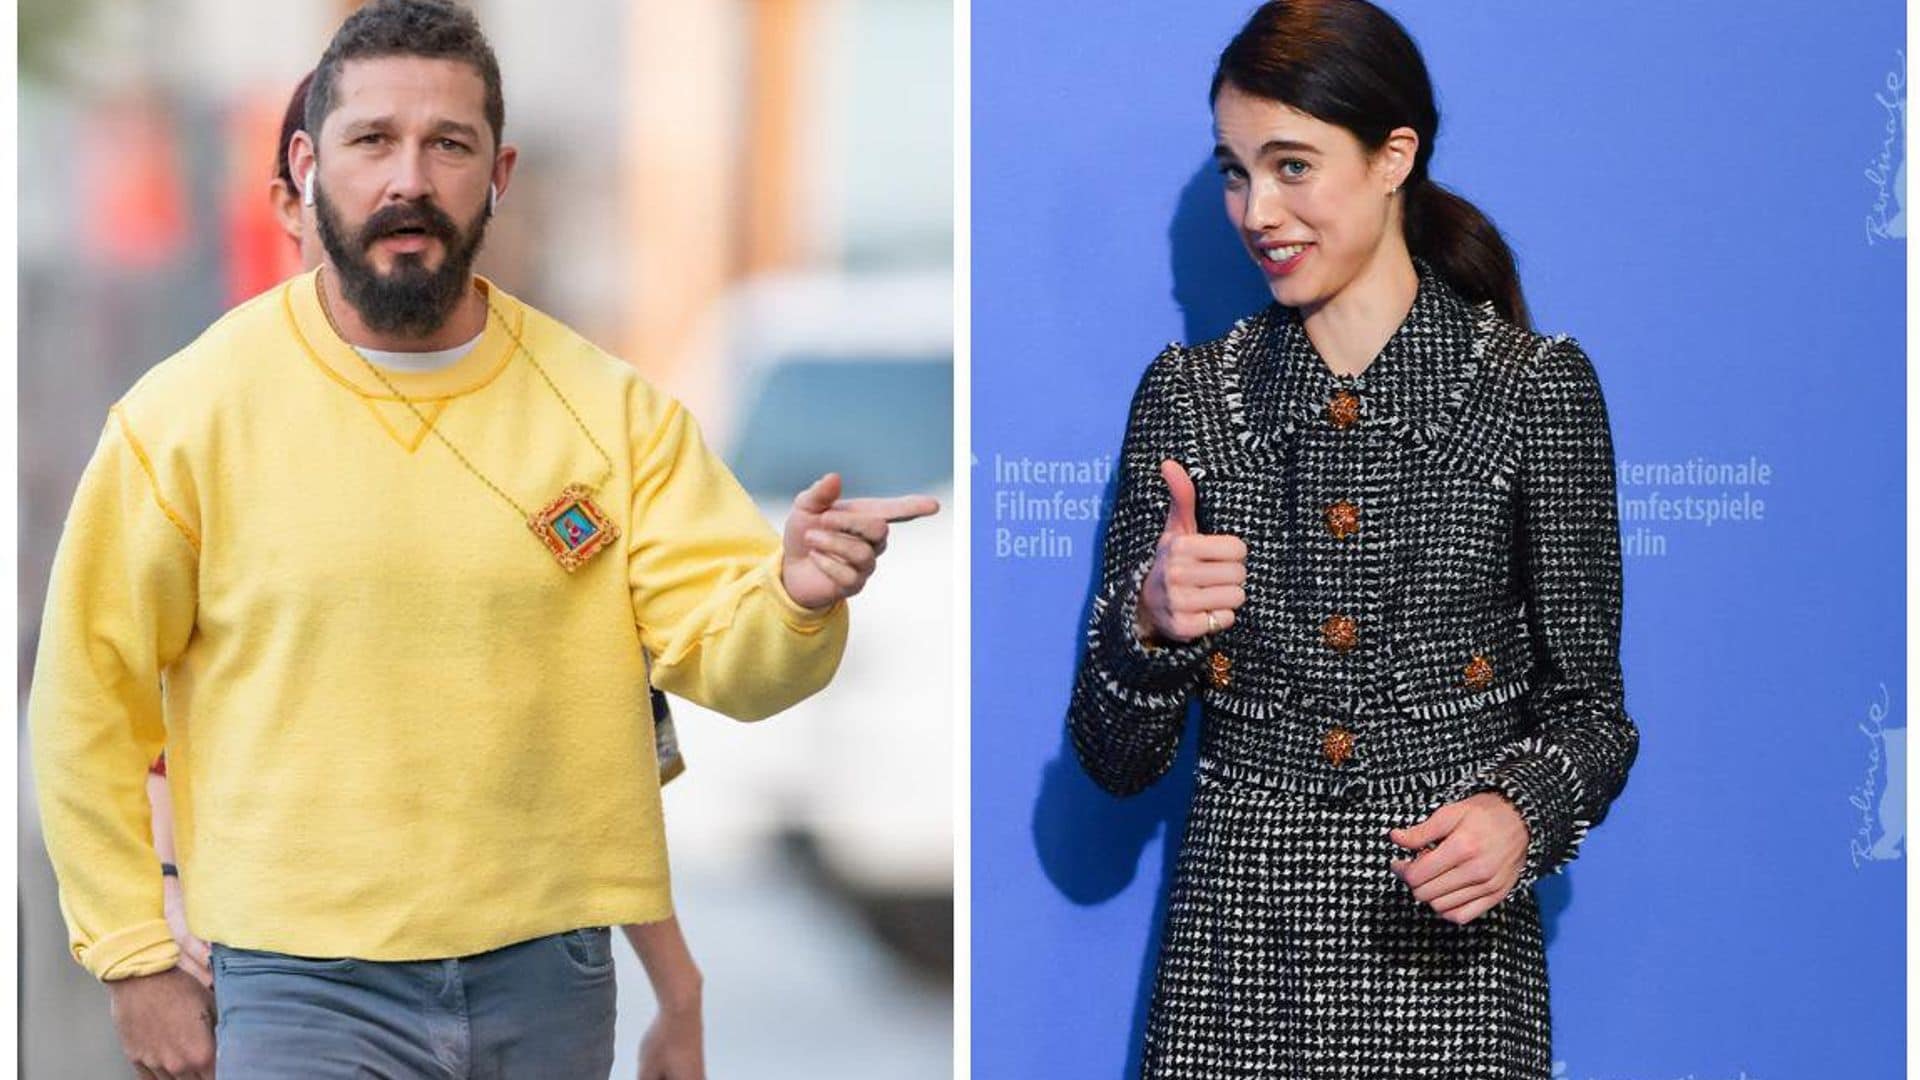 Shia LaBeouf is dating Margaret Qualley amid lawsuit